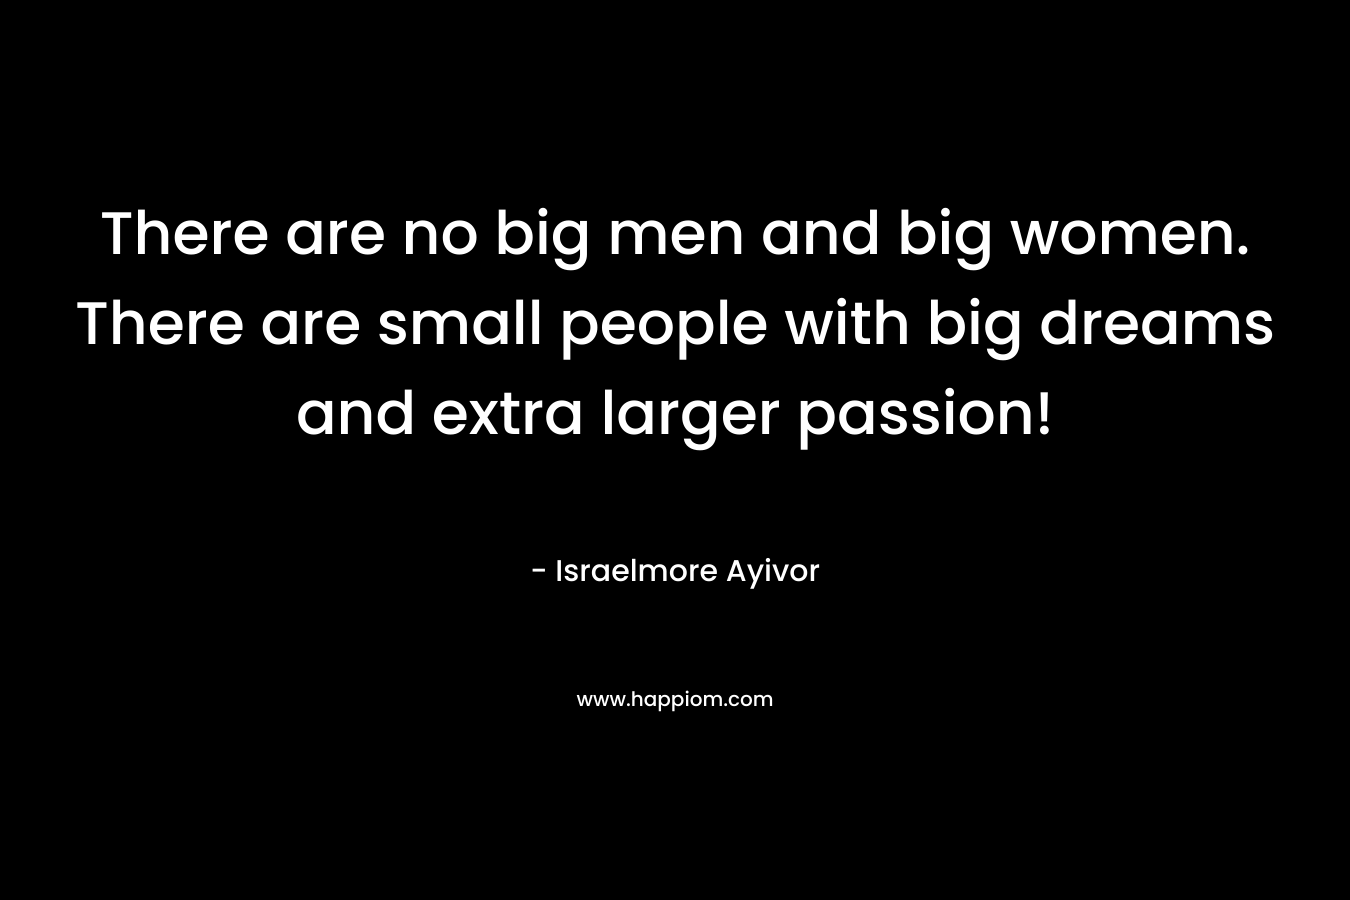 There are no big men and big women. There are small people with big dreams and extra larger passion!